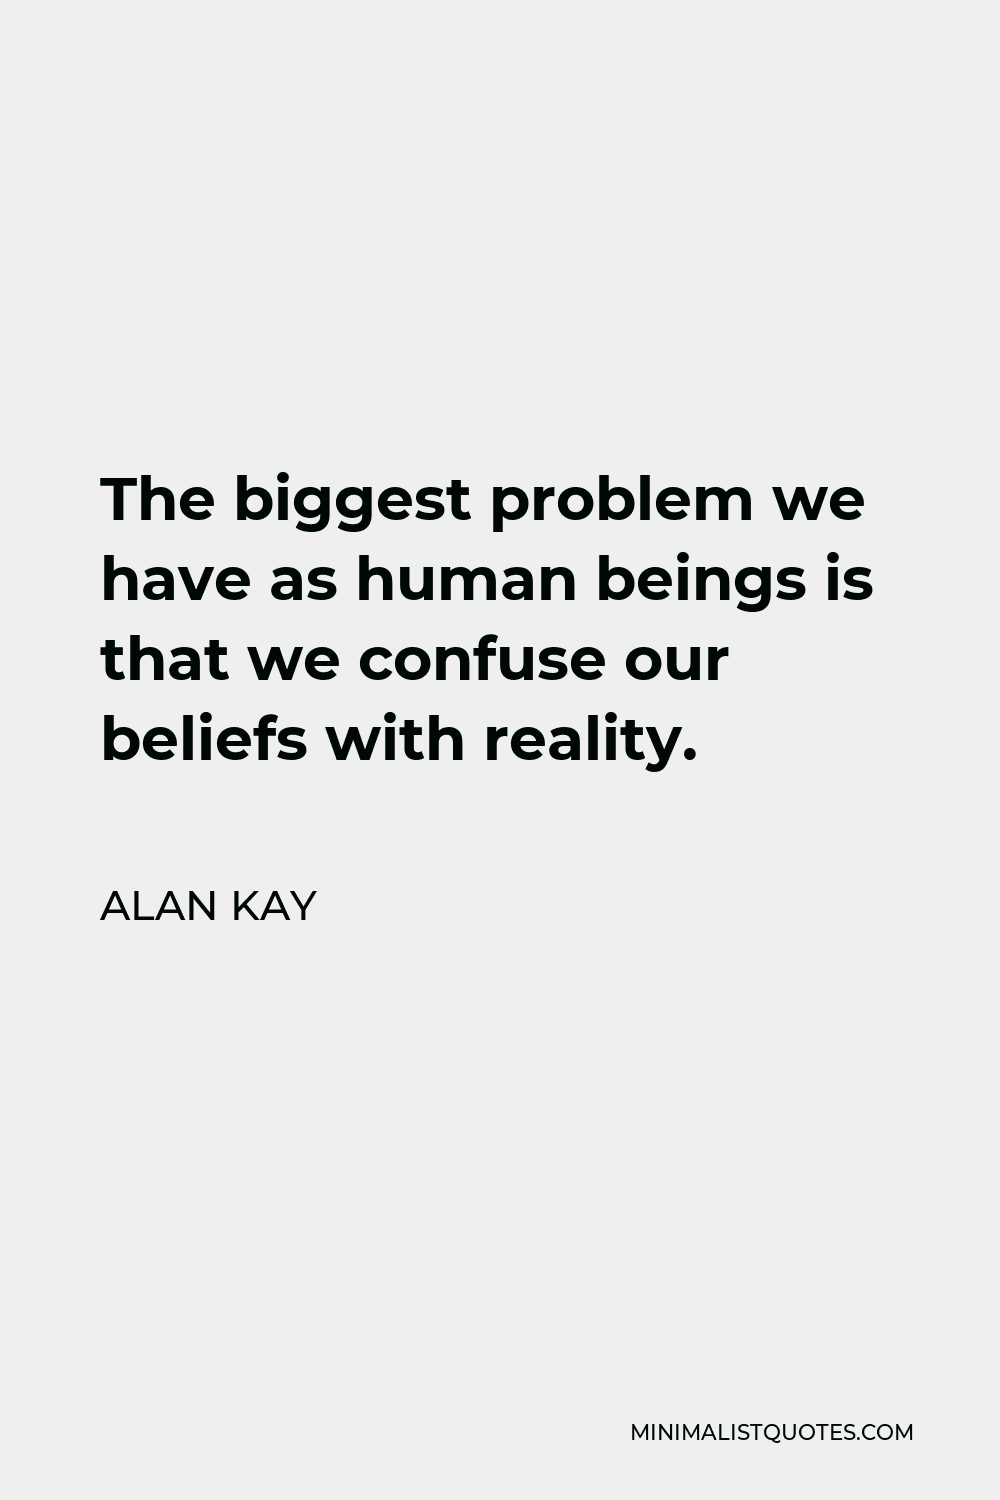 Alan Kay Quote - The biggest problem we have as human beings is that we confuse our beliefs with reality.